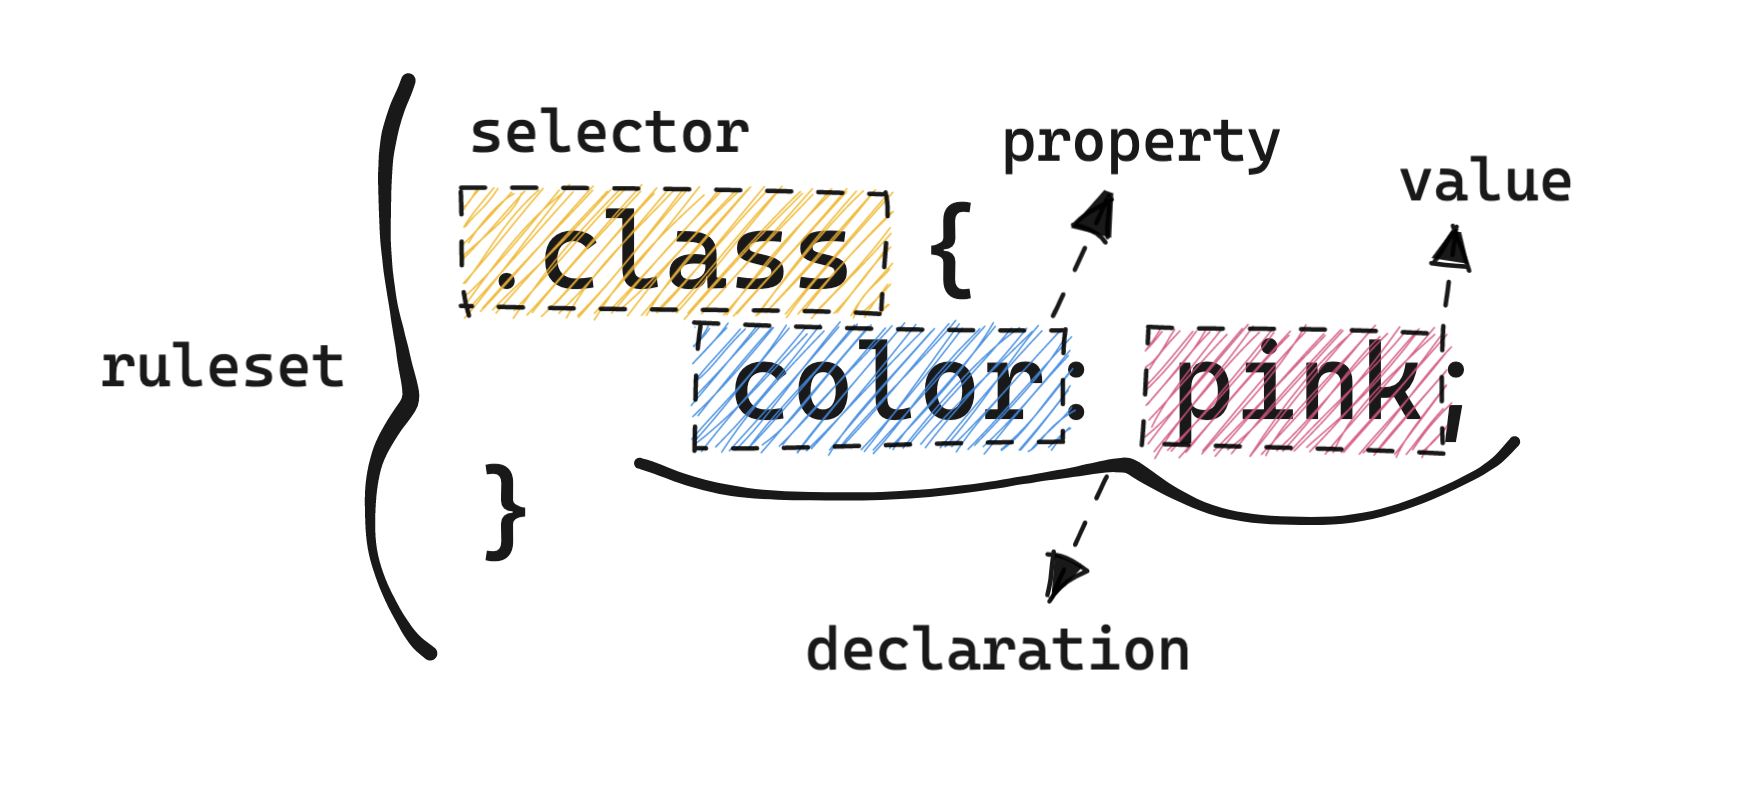 A breakdown of a ruleset, featuring a class selector: "dot class". Inside of the curly braces after the selector is a declaration, consisting of a property and value pair. The property is "color" and the value is "pink"